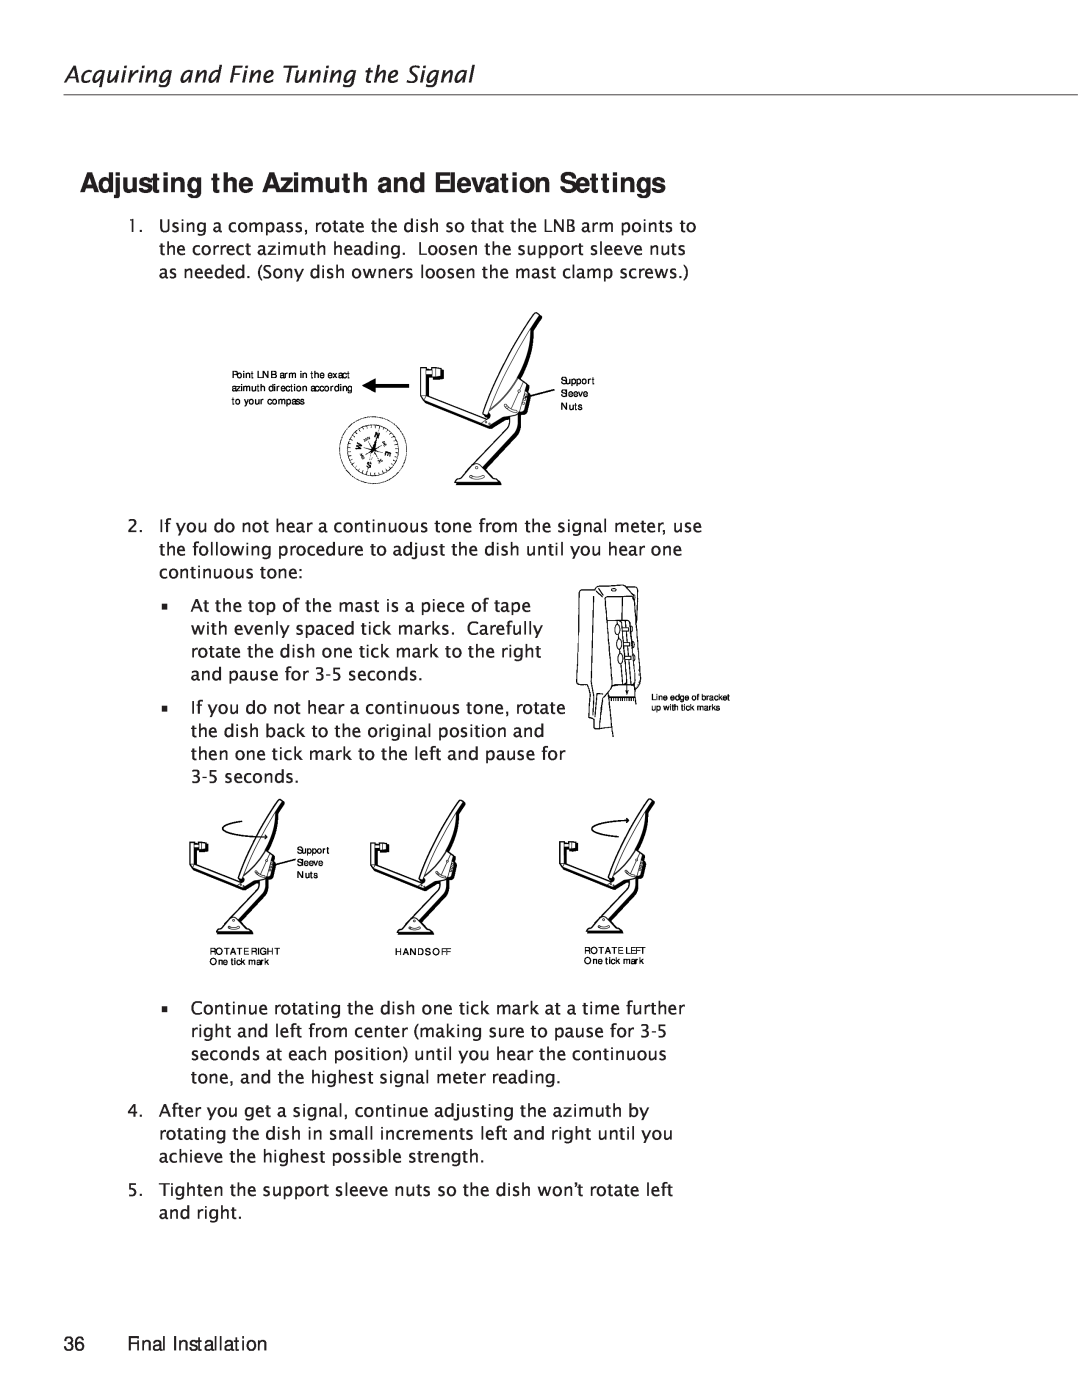 RCA Satellite TV Antenna manual Adjusting the Azimuth and Elevation Settings, Acquiring and Fine Tuning the Signal 